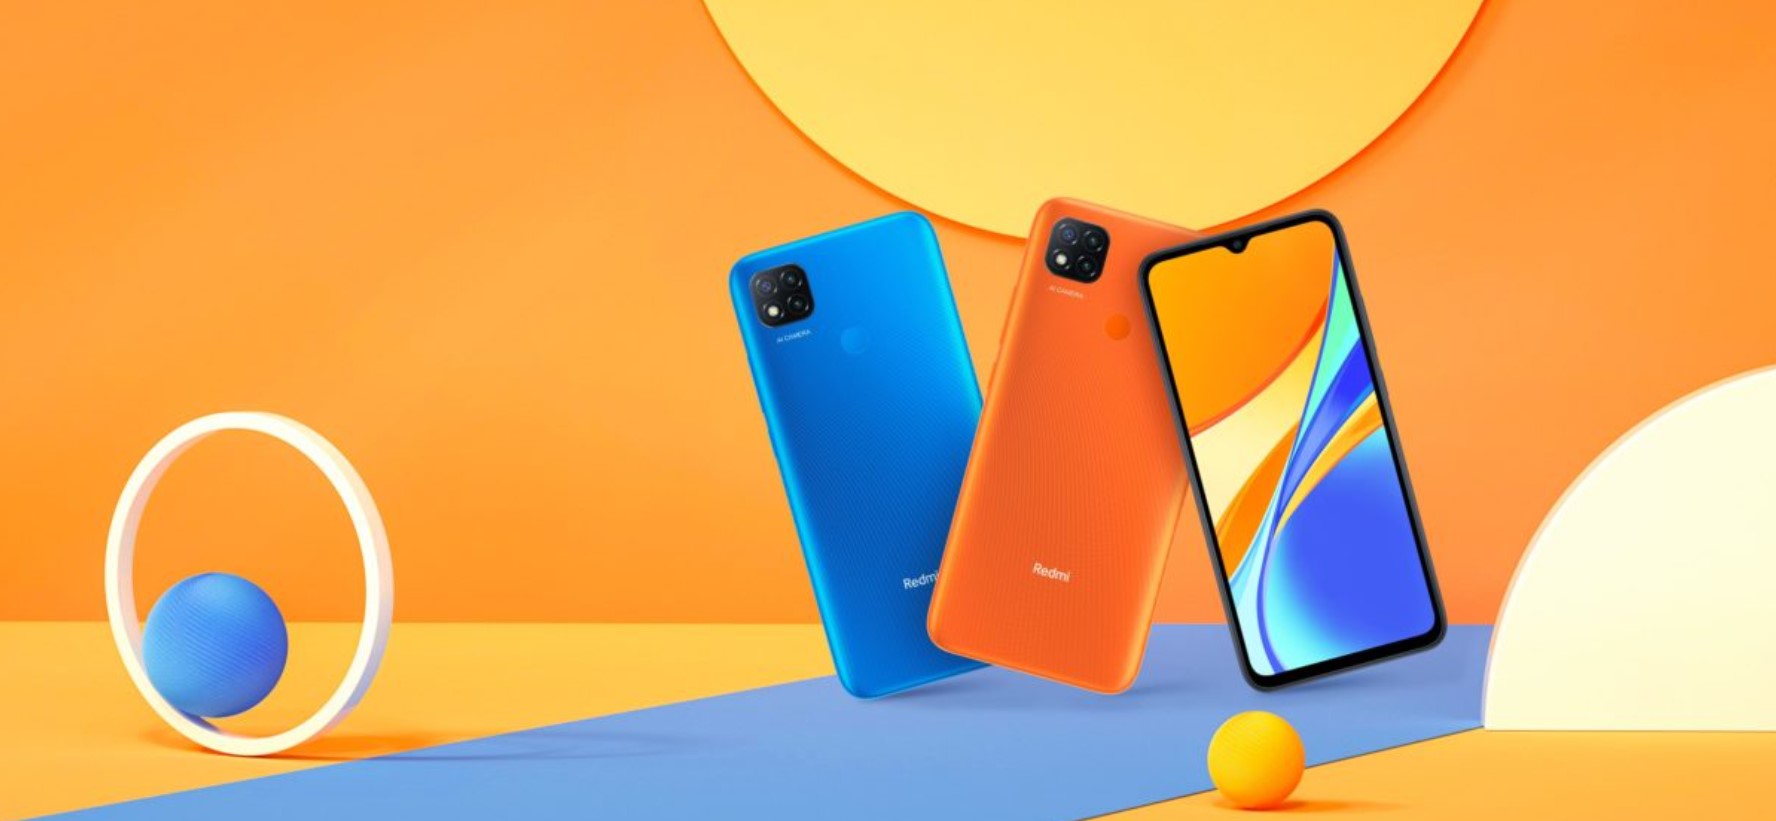 NEGATIVE OPINIONS OF THE XIAOMI REDMI 9C IN 2022: PROBLEMS AND FAILURES OF THE XIAOMI MOBILE